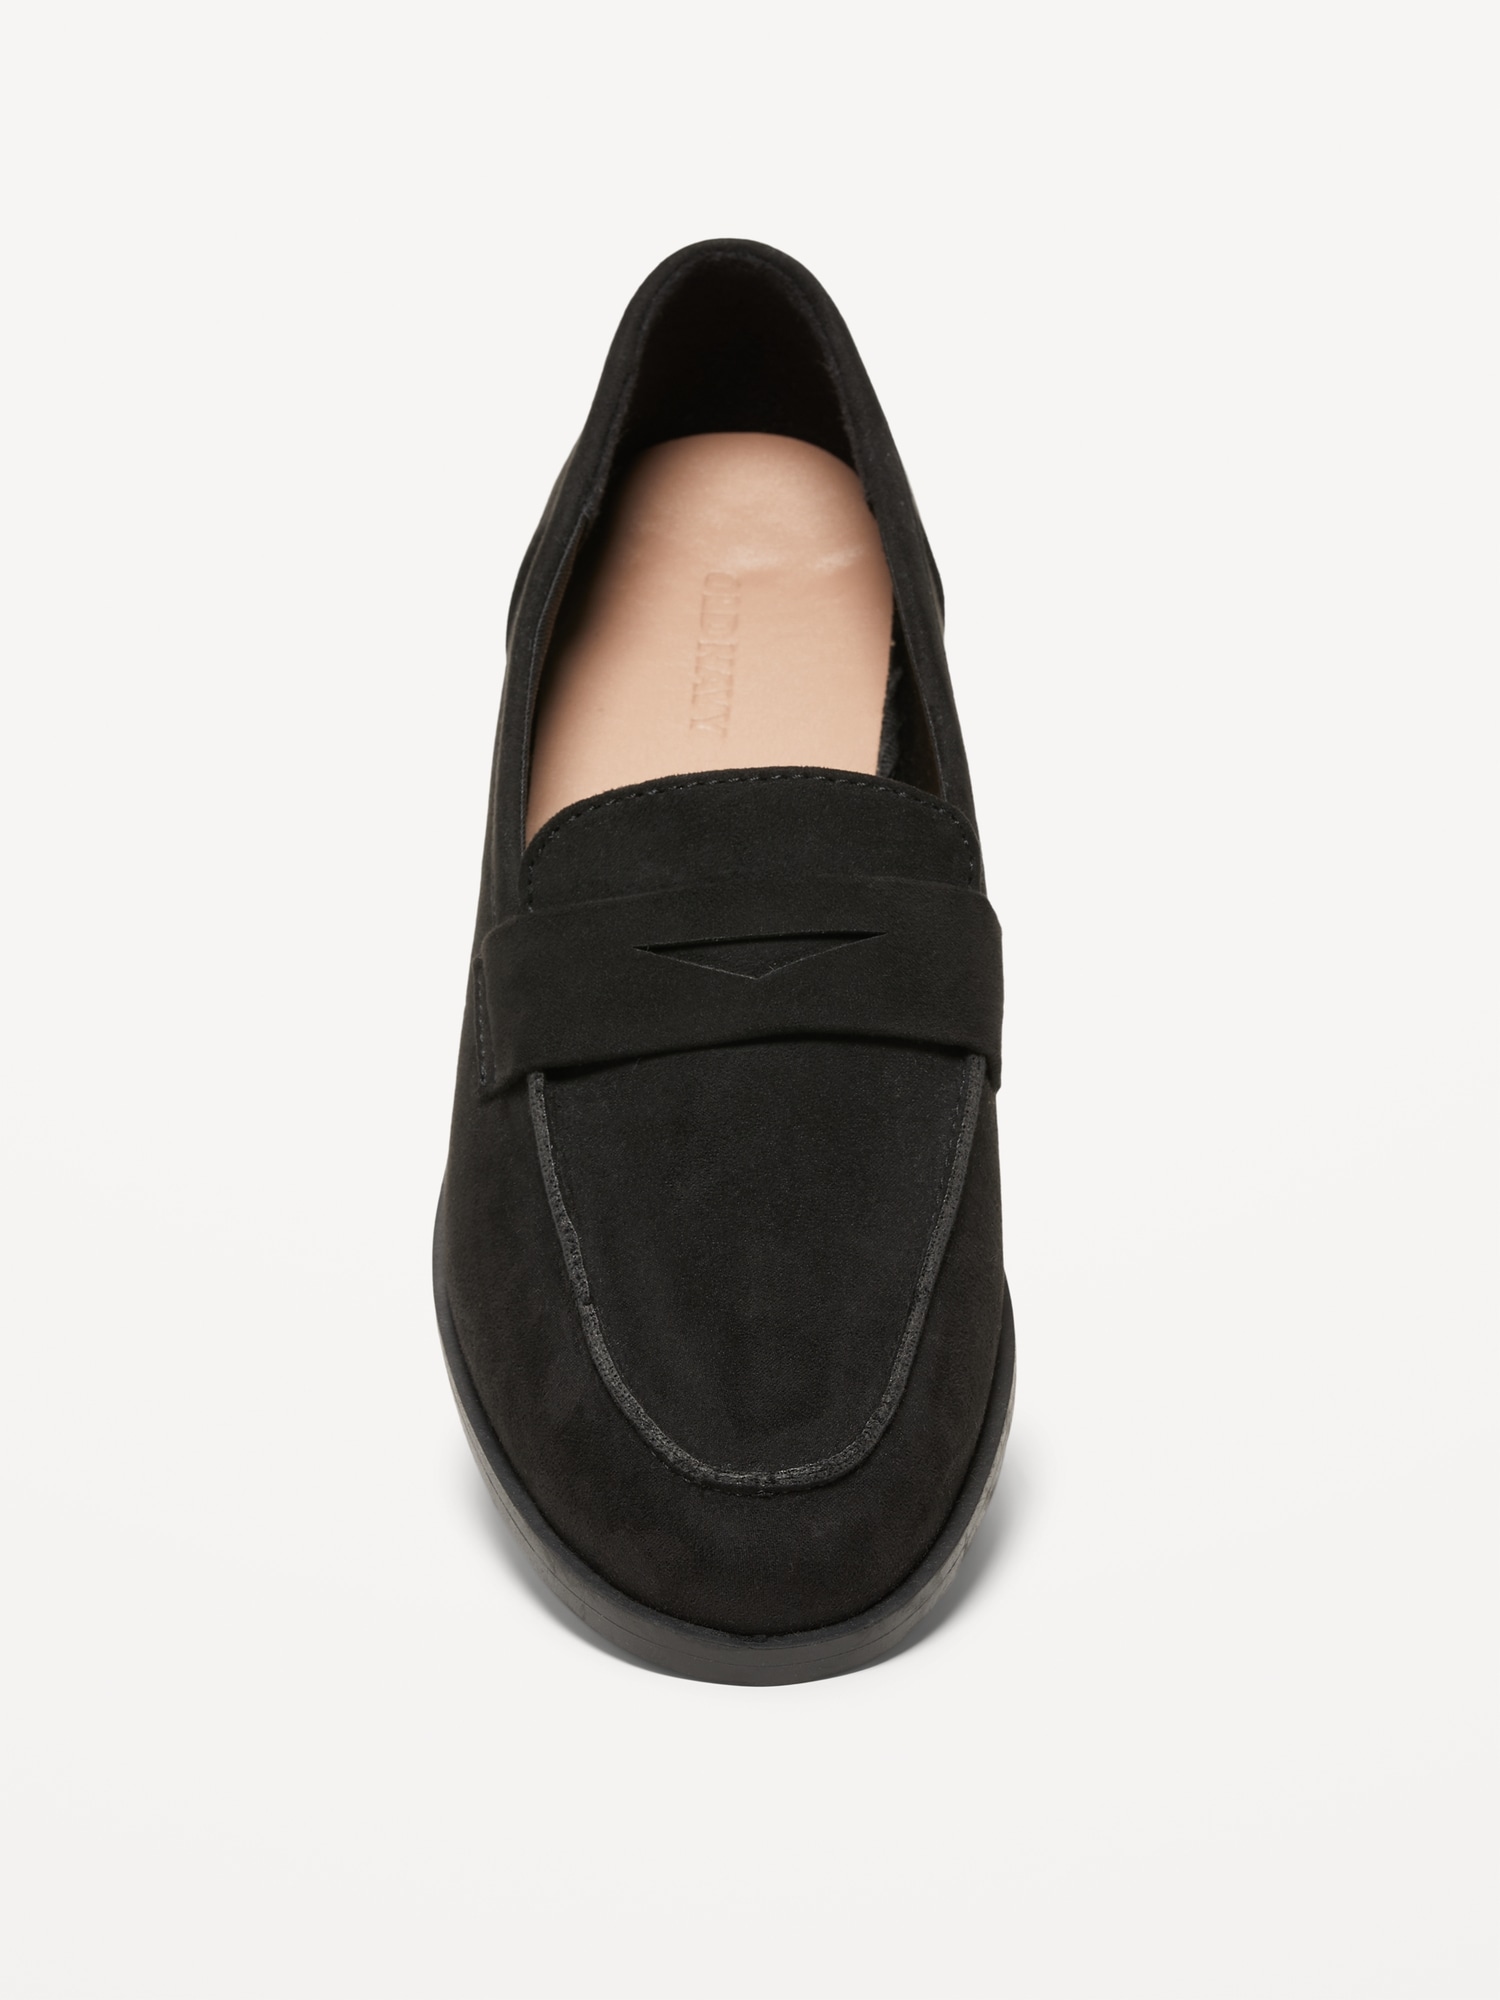 Penny Loafer Shoes Women Old Navy